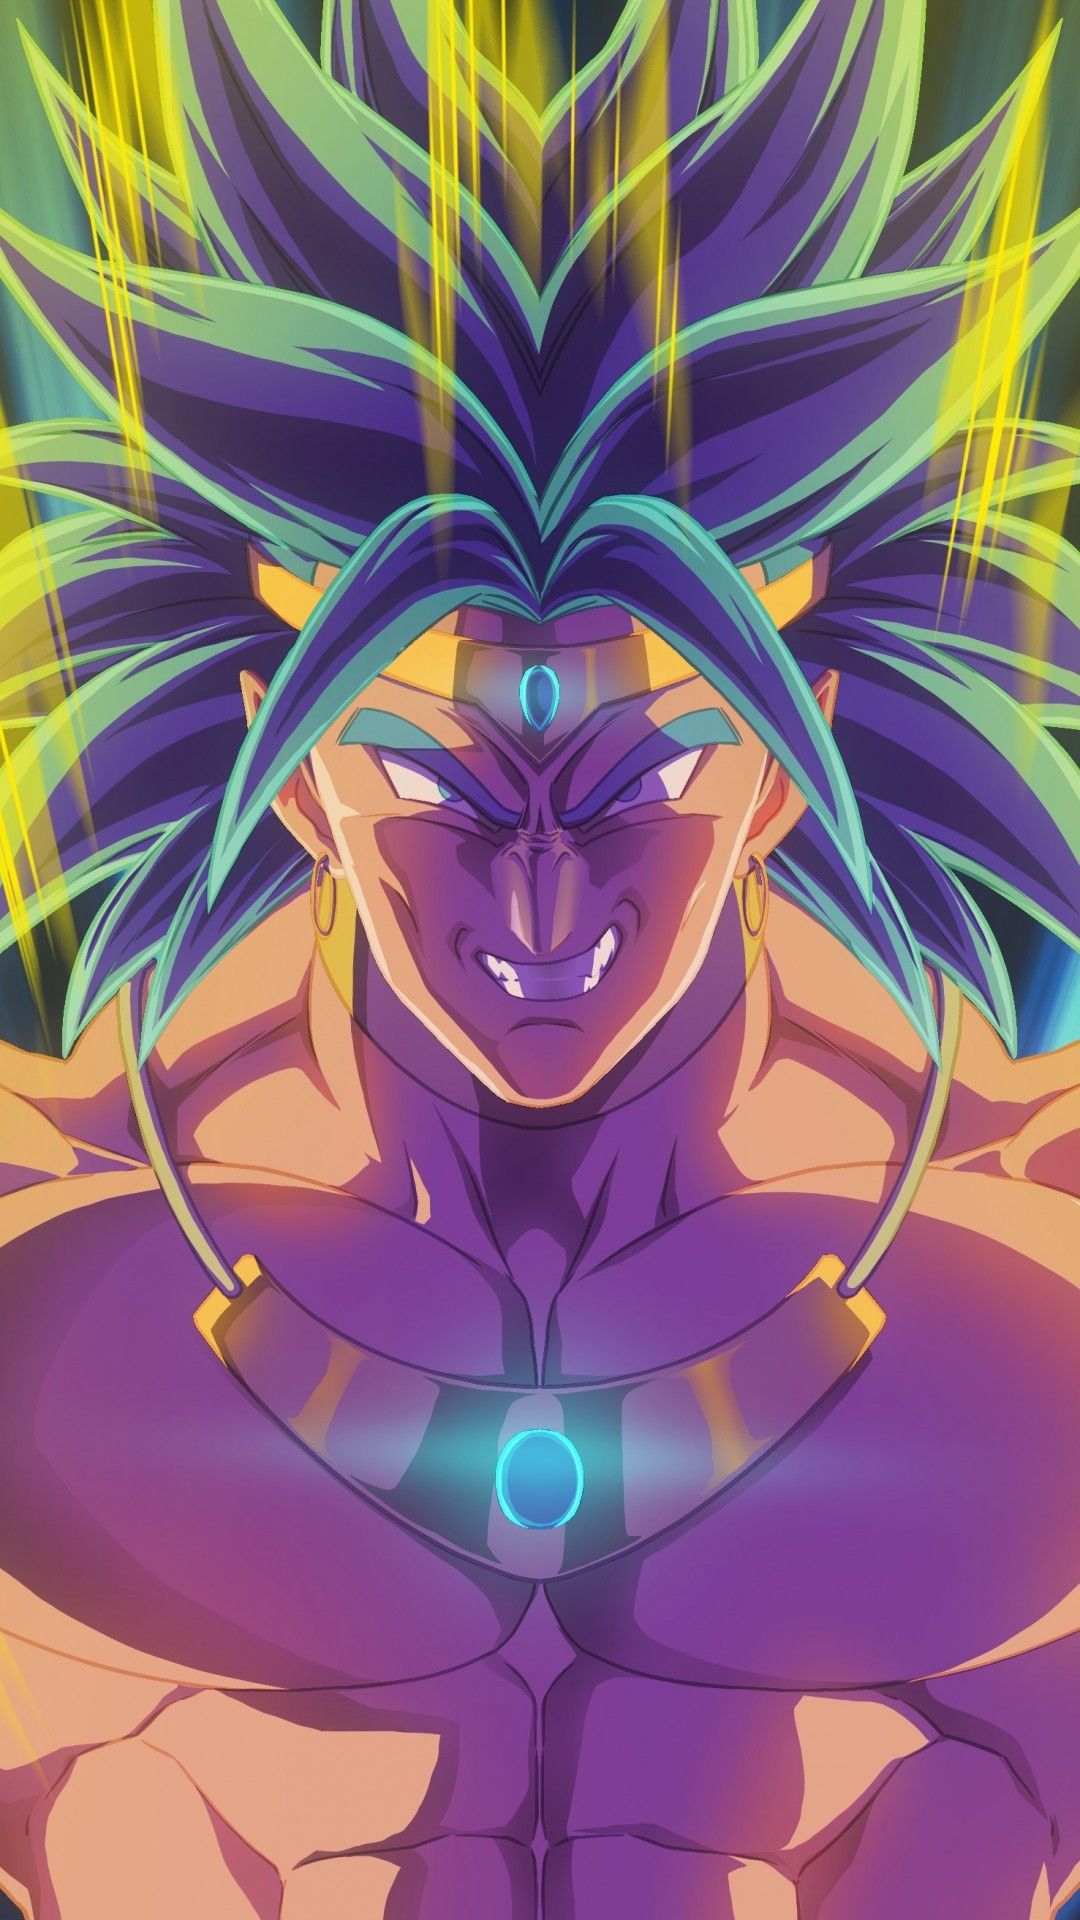 Download 1080x1920 Broly, Dragon Ball Wallpaper for iPhone iPhone 7 Plus, iPhone 6+, Sony Xperia Z, HTC One